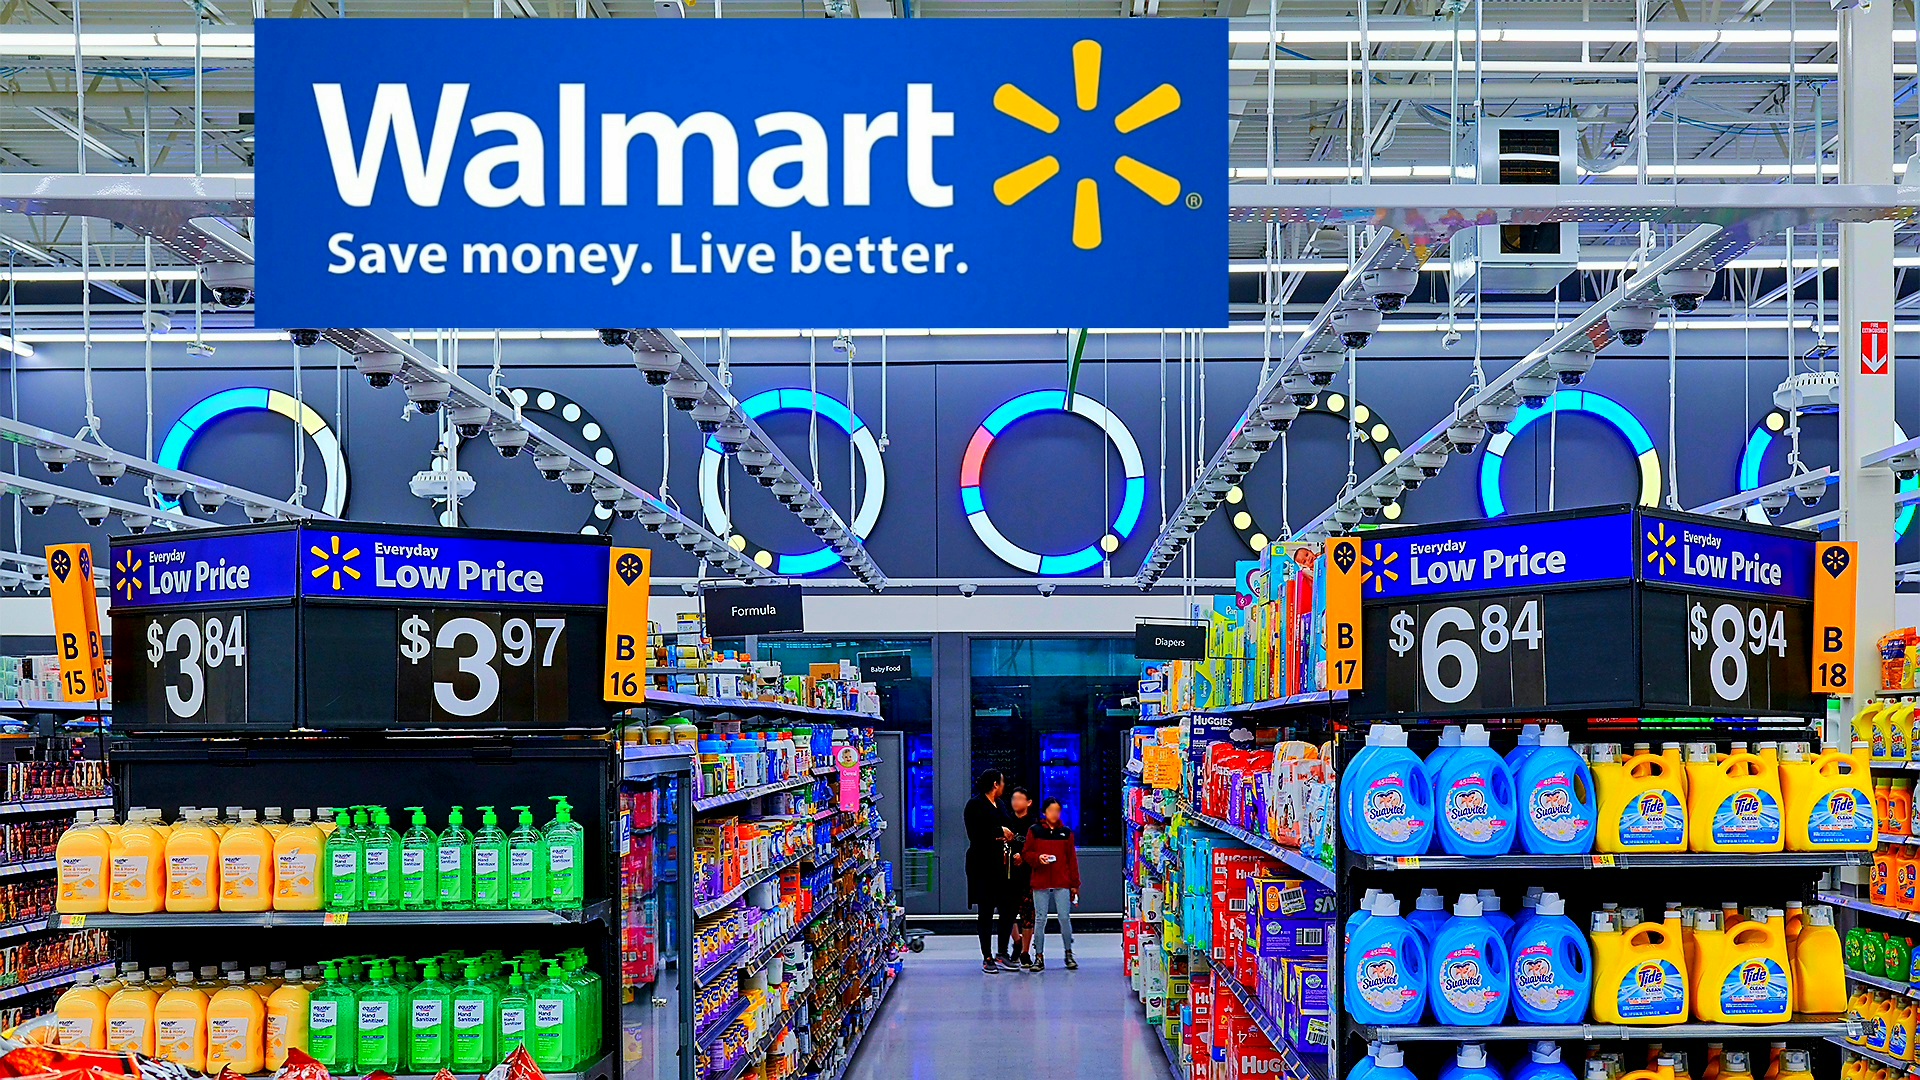 Walmart will use artificial intelligence to replenish its products